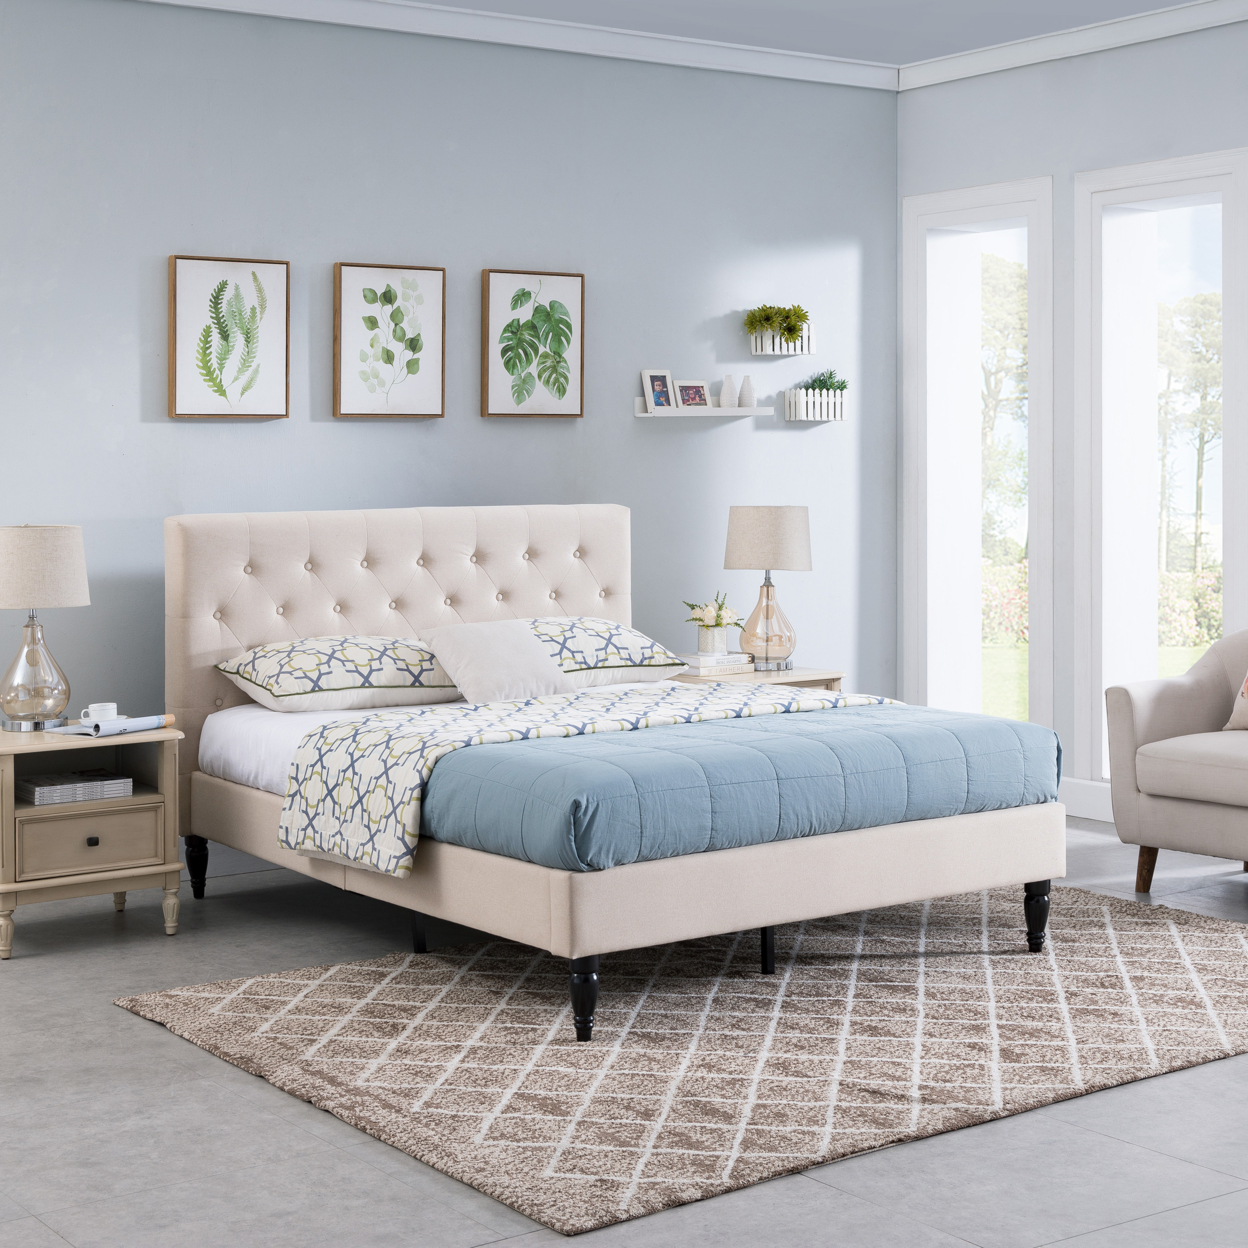 Agnes Fully-Upholstered Queen-Size Platform Bed Frame, Low-Profile, Contemporary - Beige